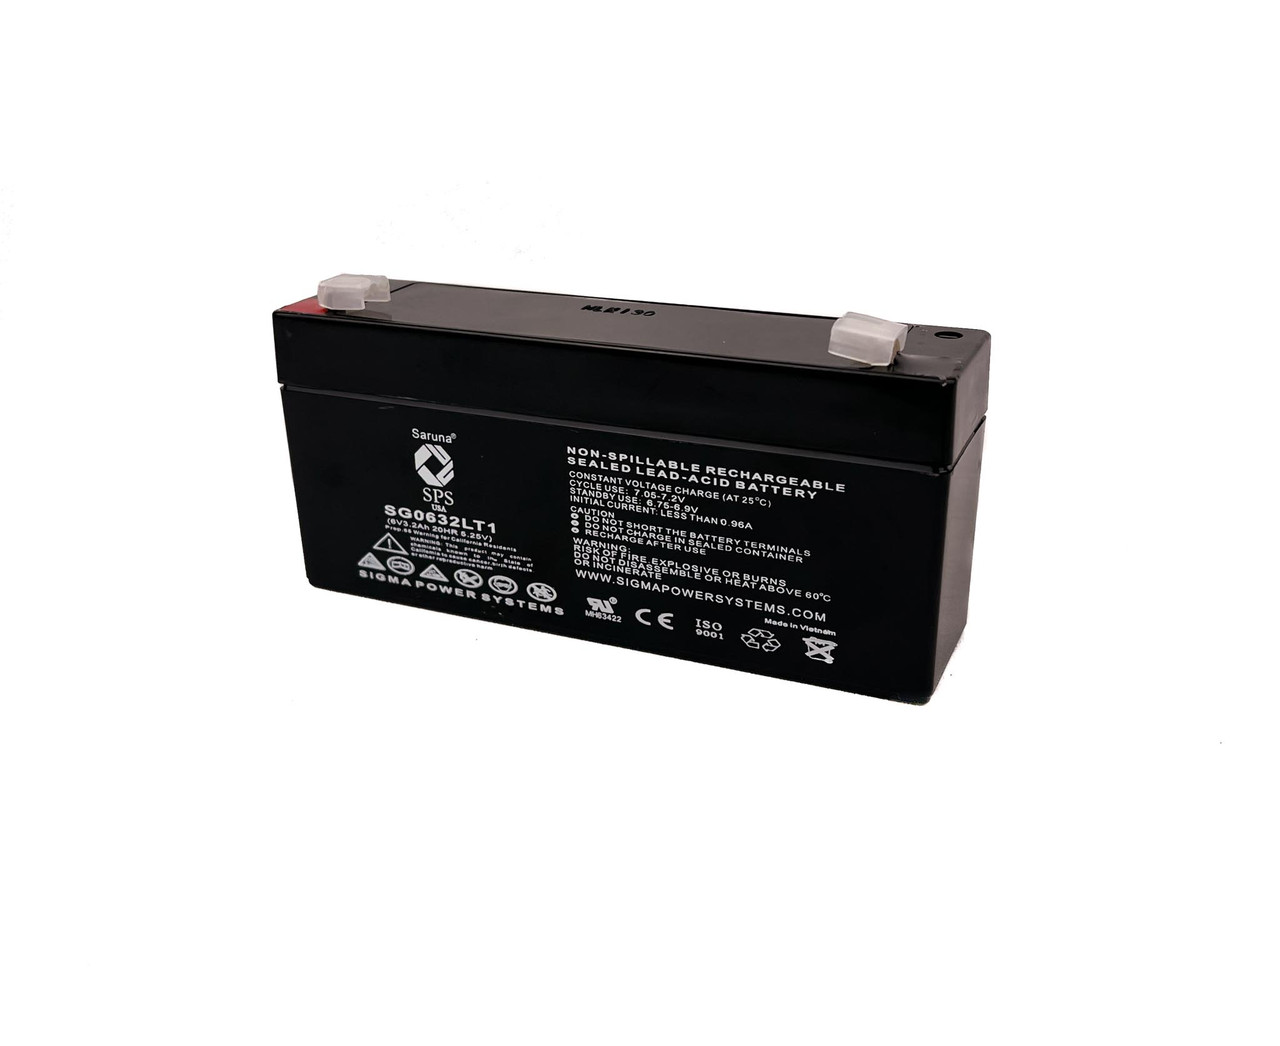 Raion Power 6V 3.2Ah Non-Spillable Replacement Rechargebale Battery for NEATA NT6-3.2